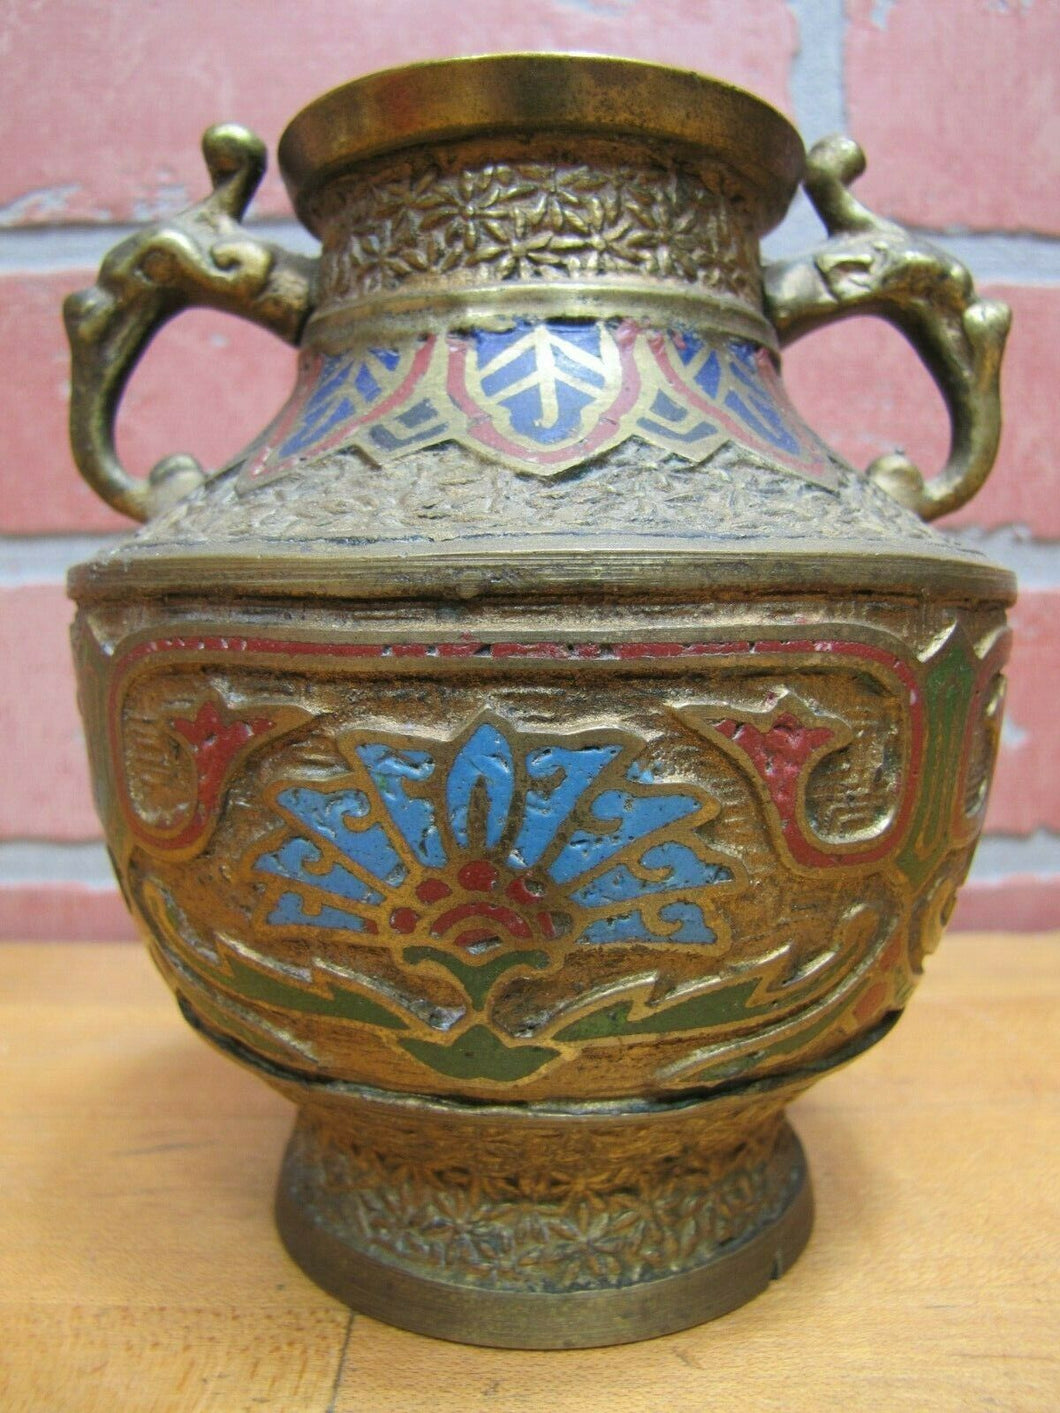 Old Brass Enamel Japanese Vase with Handles Multi Color Decorated Raised Design